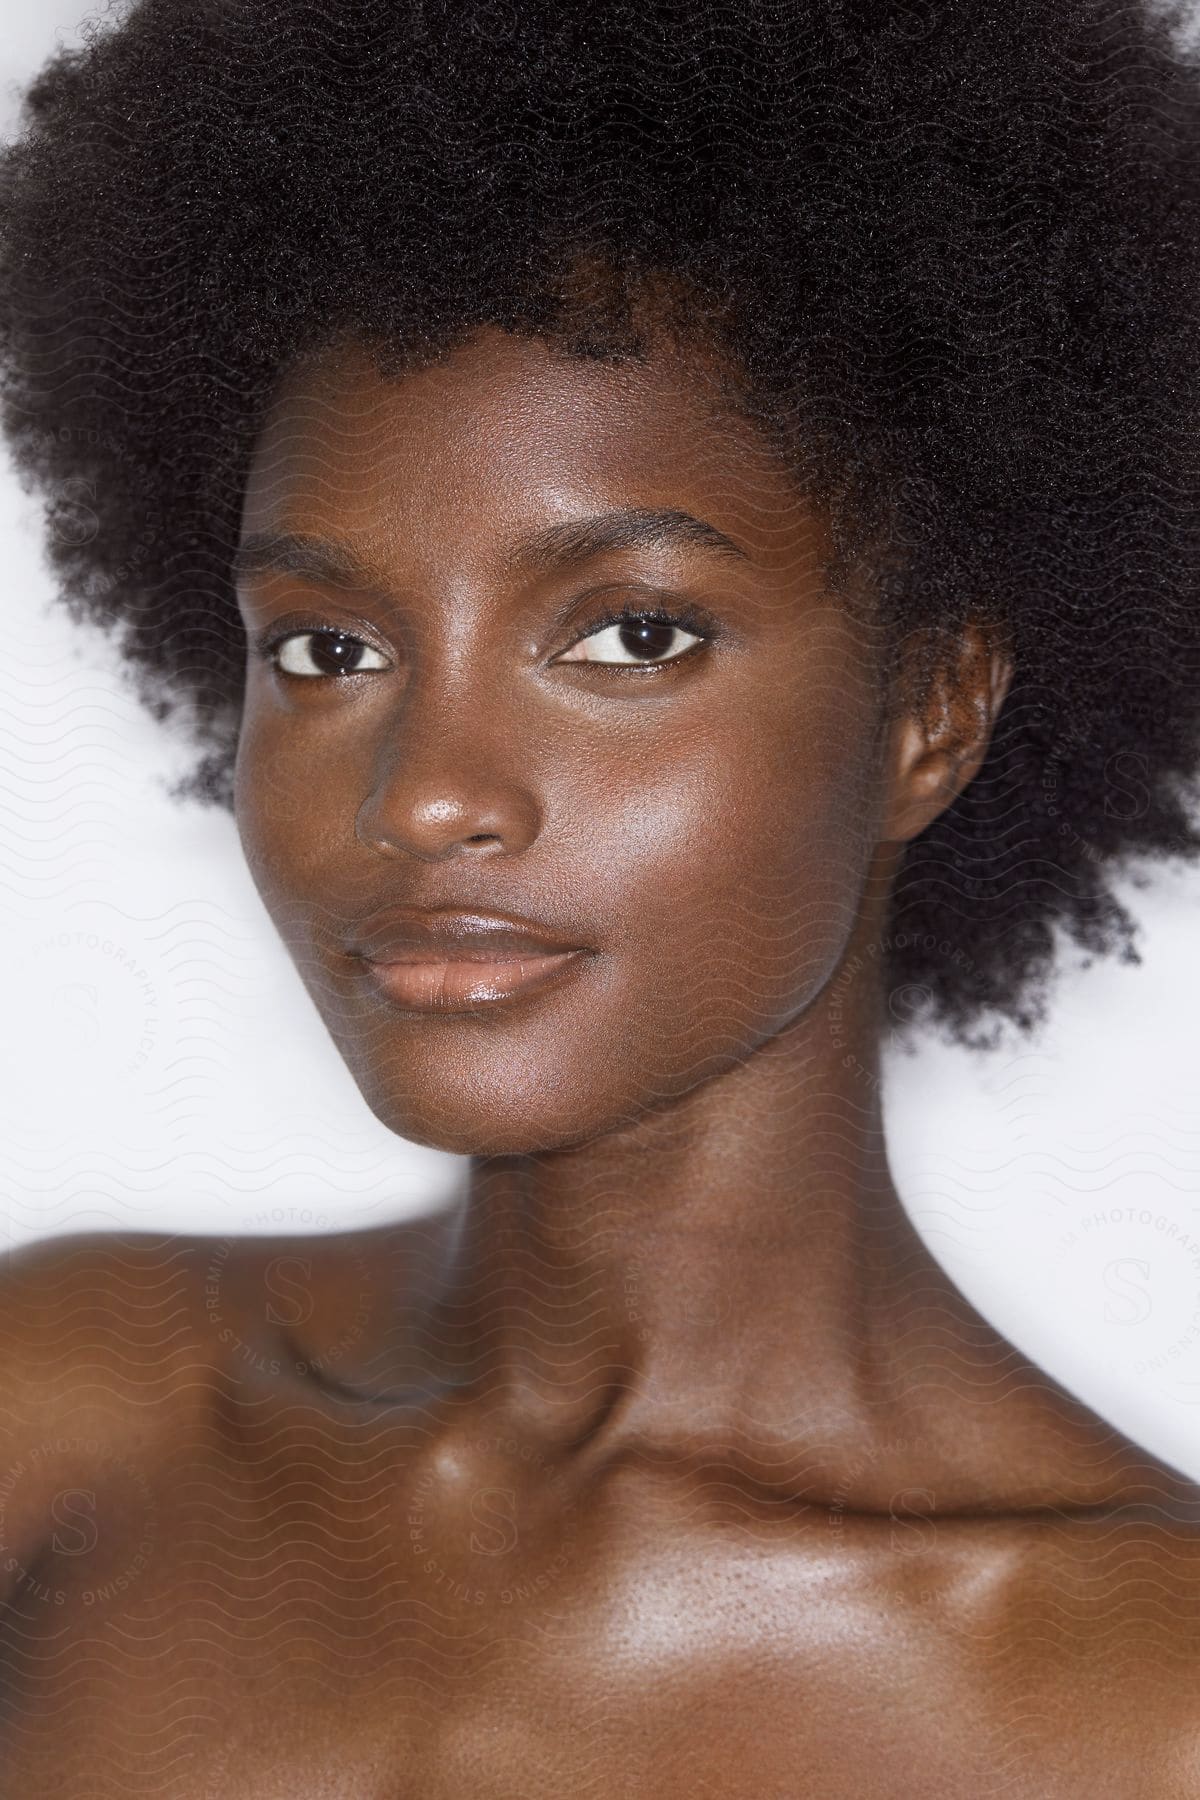 A black lady has an Afro style hair.